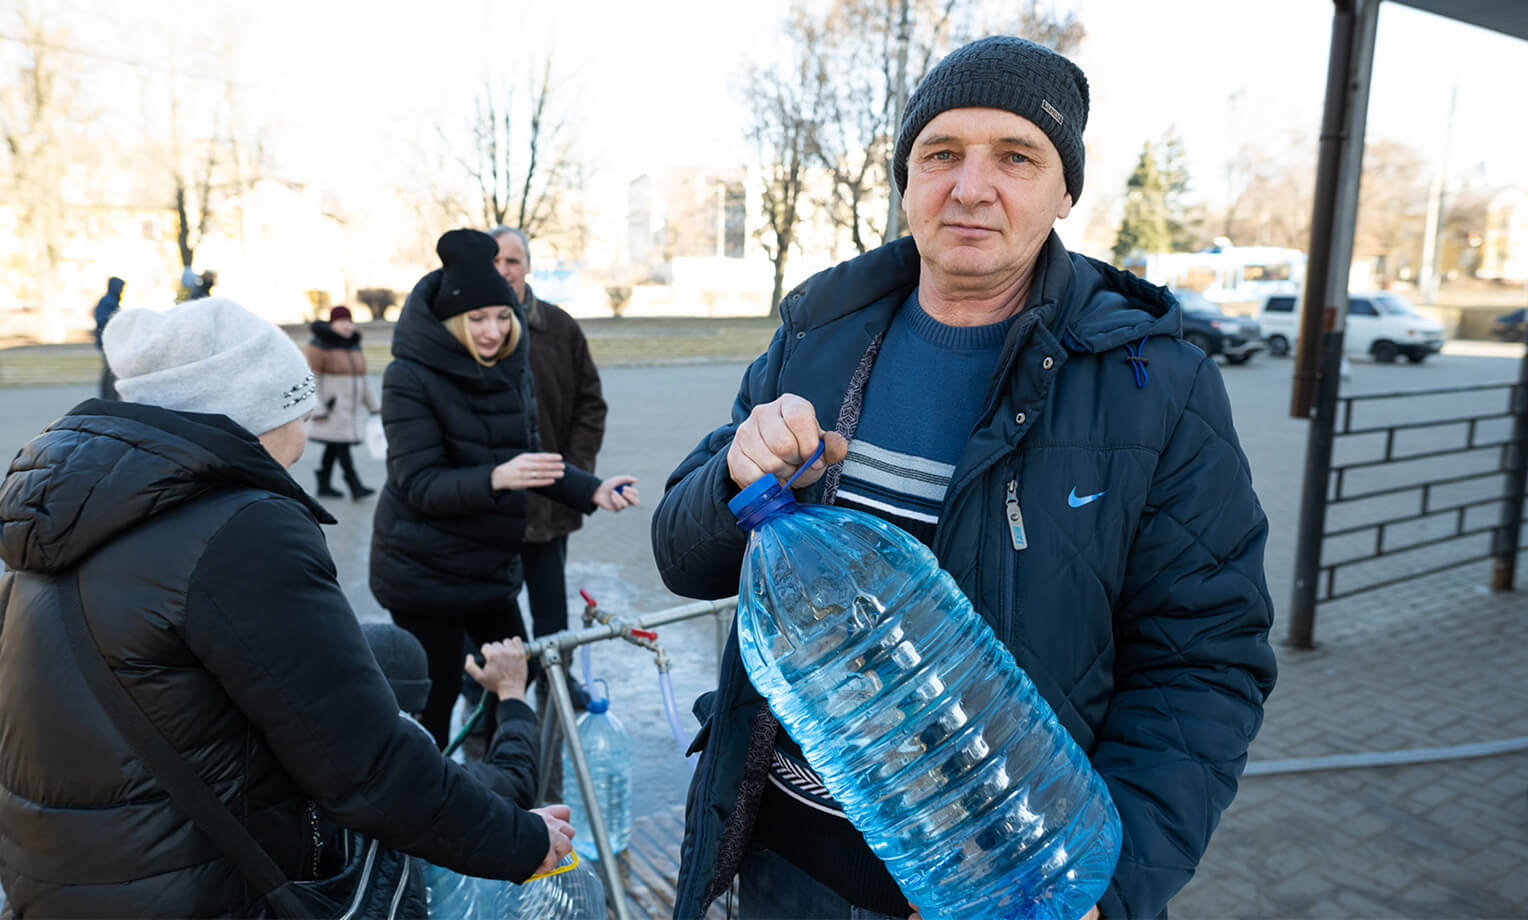 Clean water gives many Ukrainians hope for a better tomorrow.